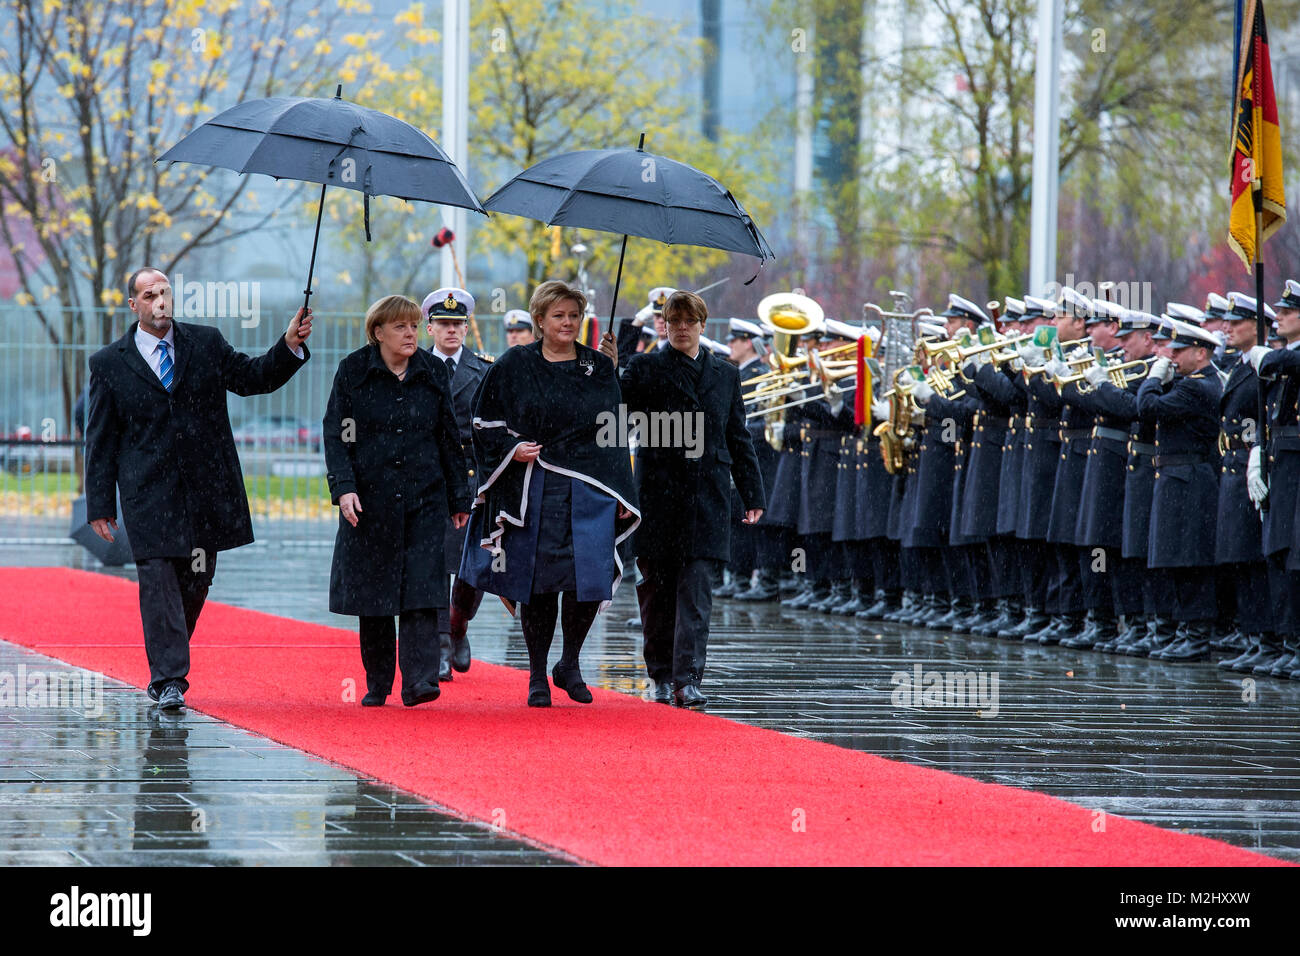 German Chancellor Angela Merkel give the welcomes to the Prime Minister of the Kingdom of Norway, Erna Solberg, with military honors in the Federal Chancellery. Stock Photo